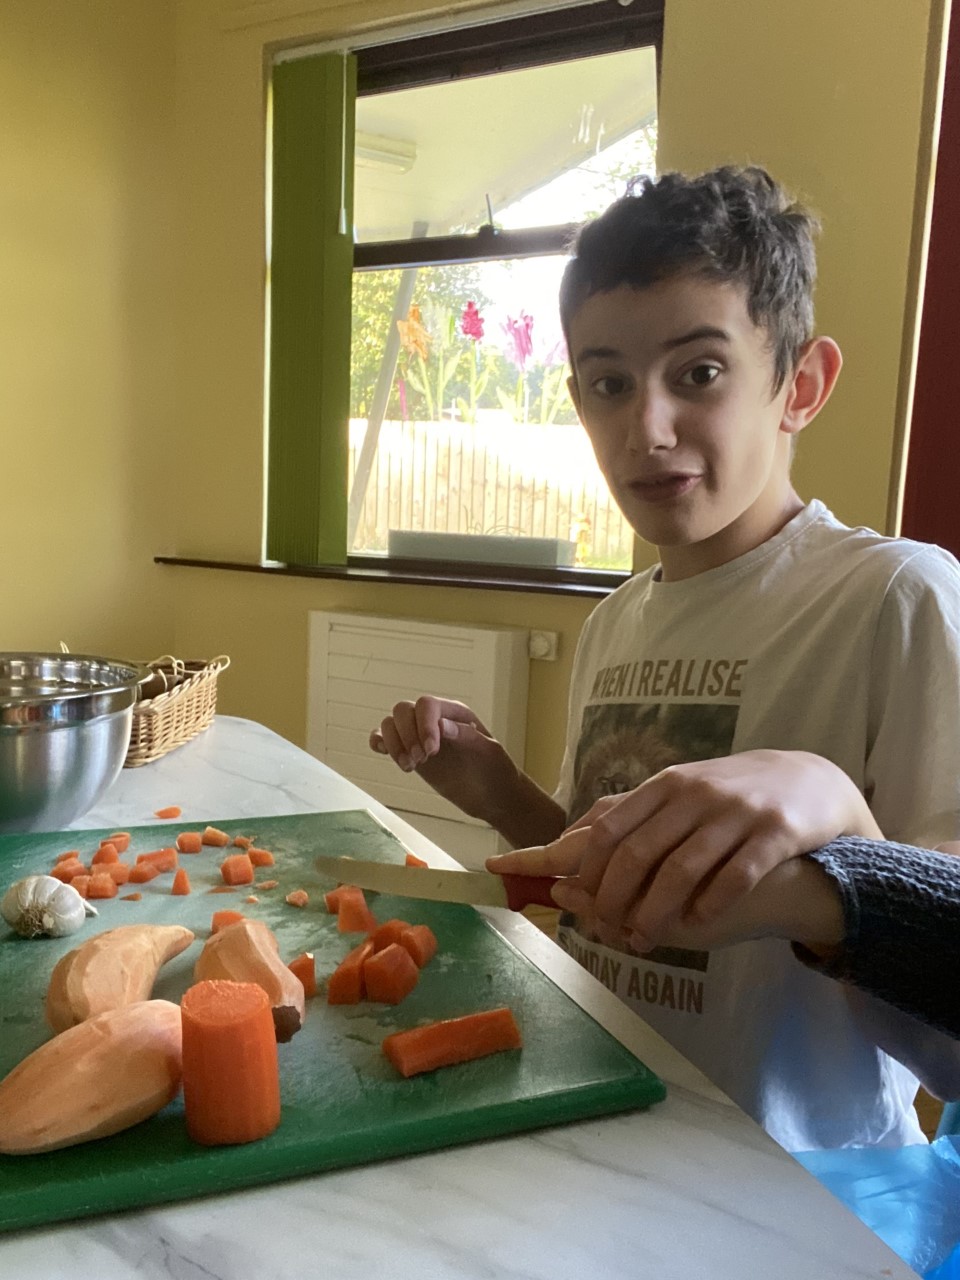 Childrens Residential - Nutrition Image Chopping